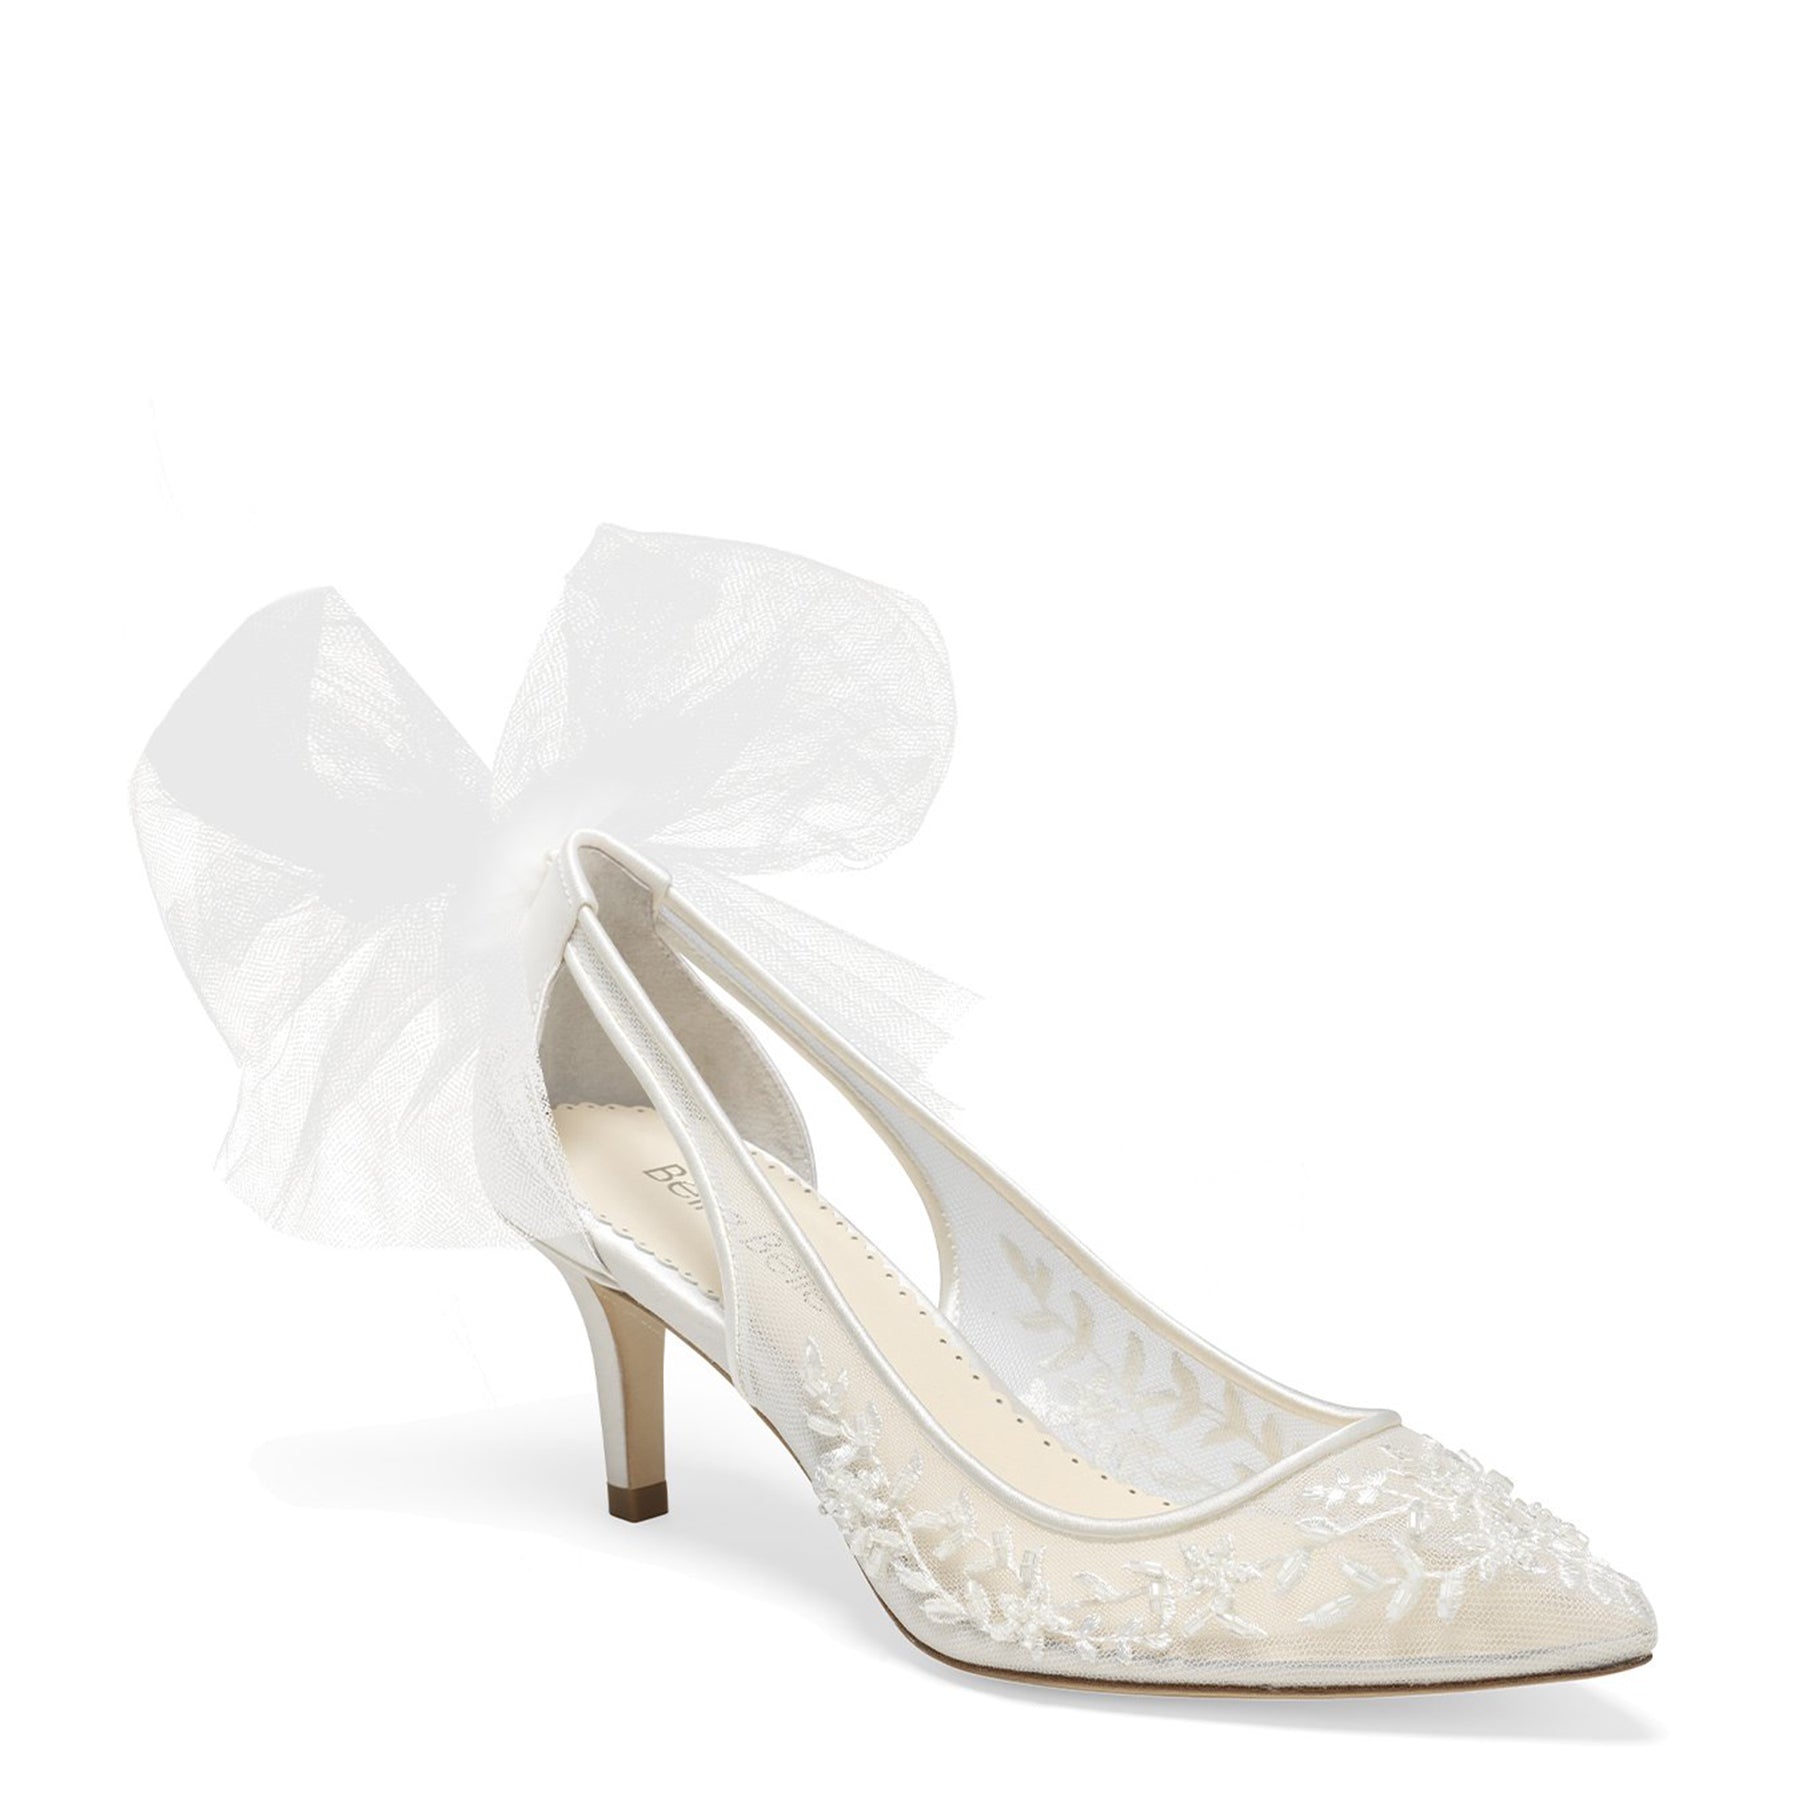 Esther - Floral and Tulle Bow Kitten Heel